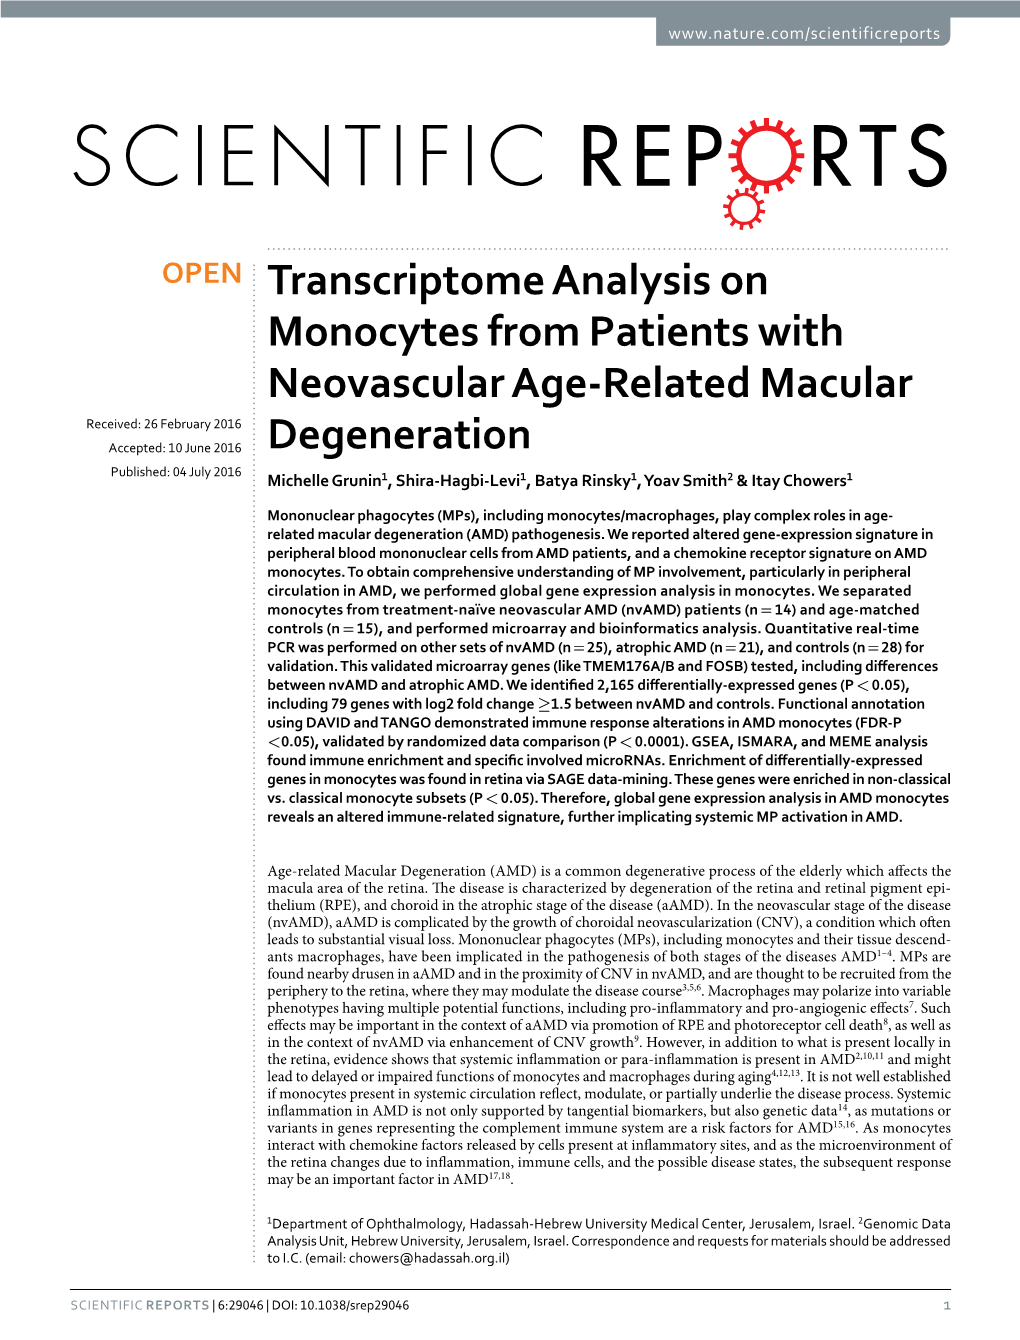 Transcriptome Analysis on Monocytes from Patients With